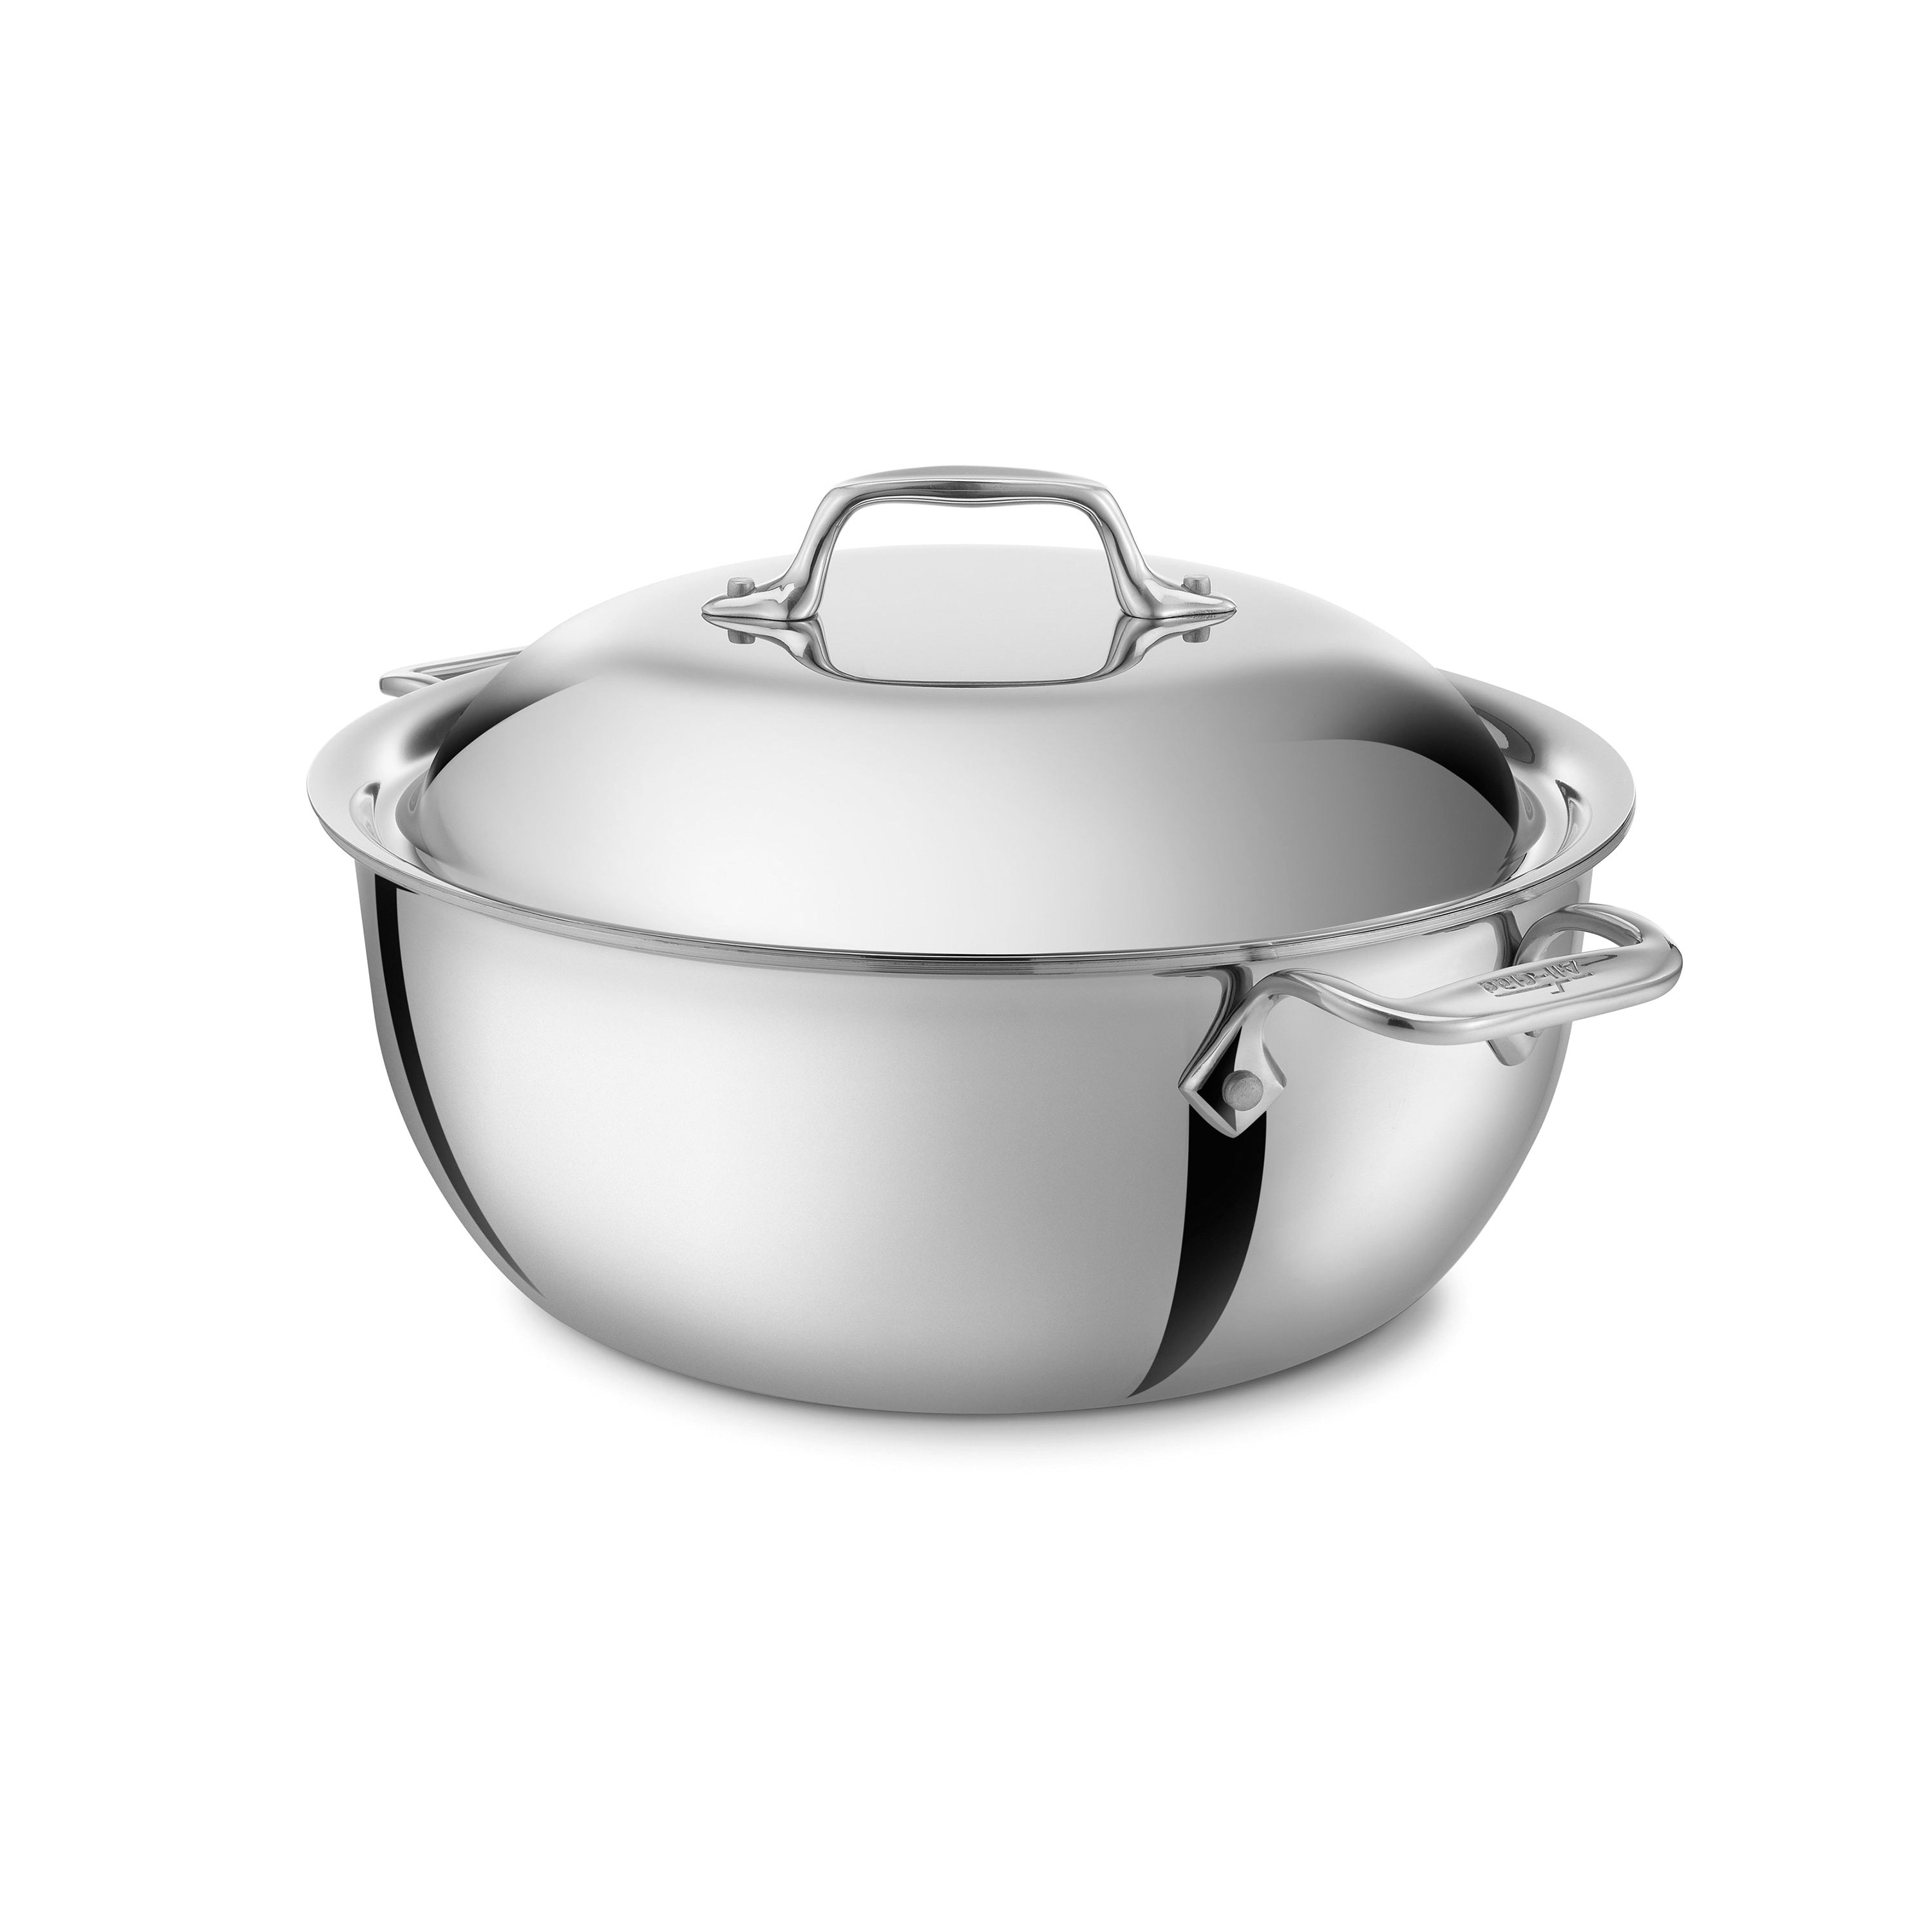 Stainless Steel Pan Oven